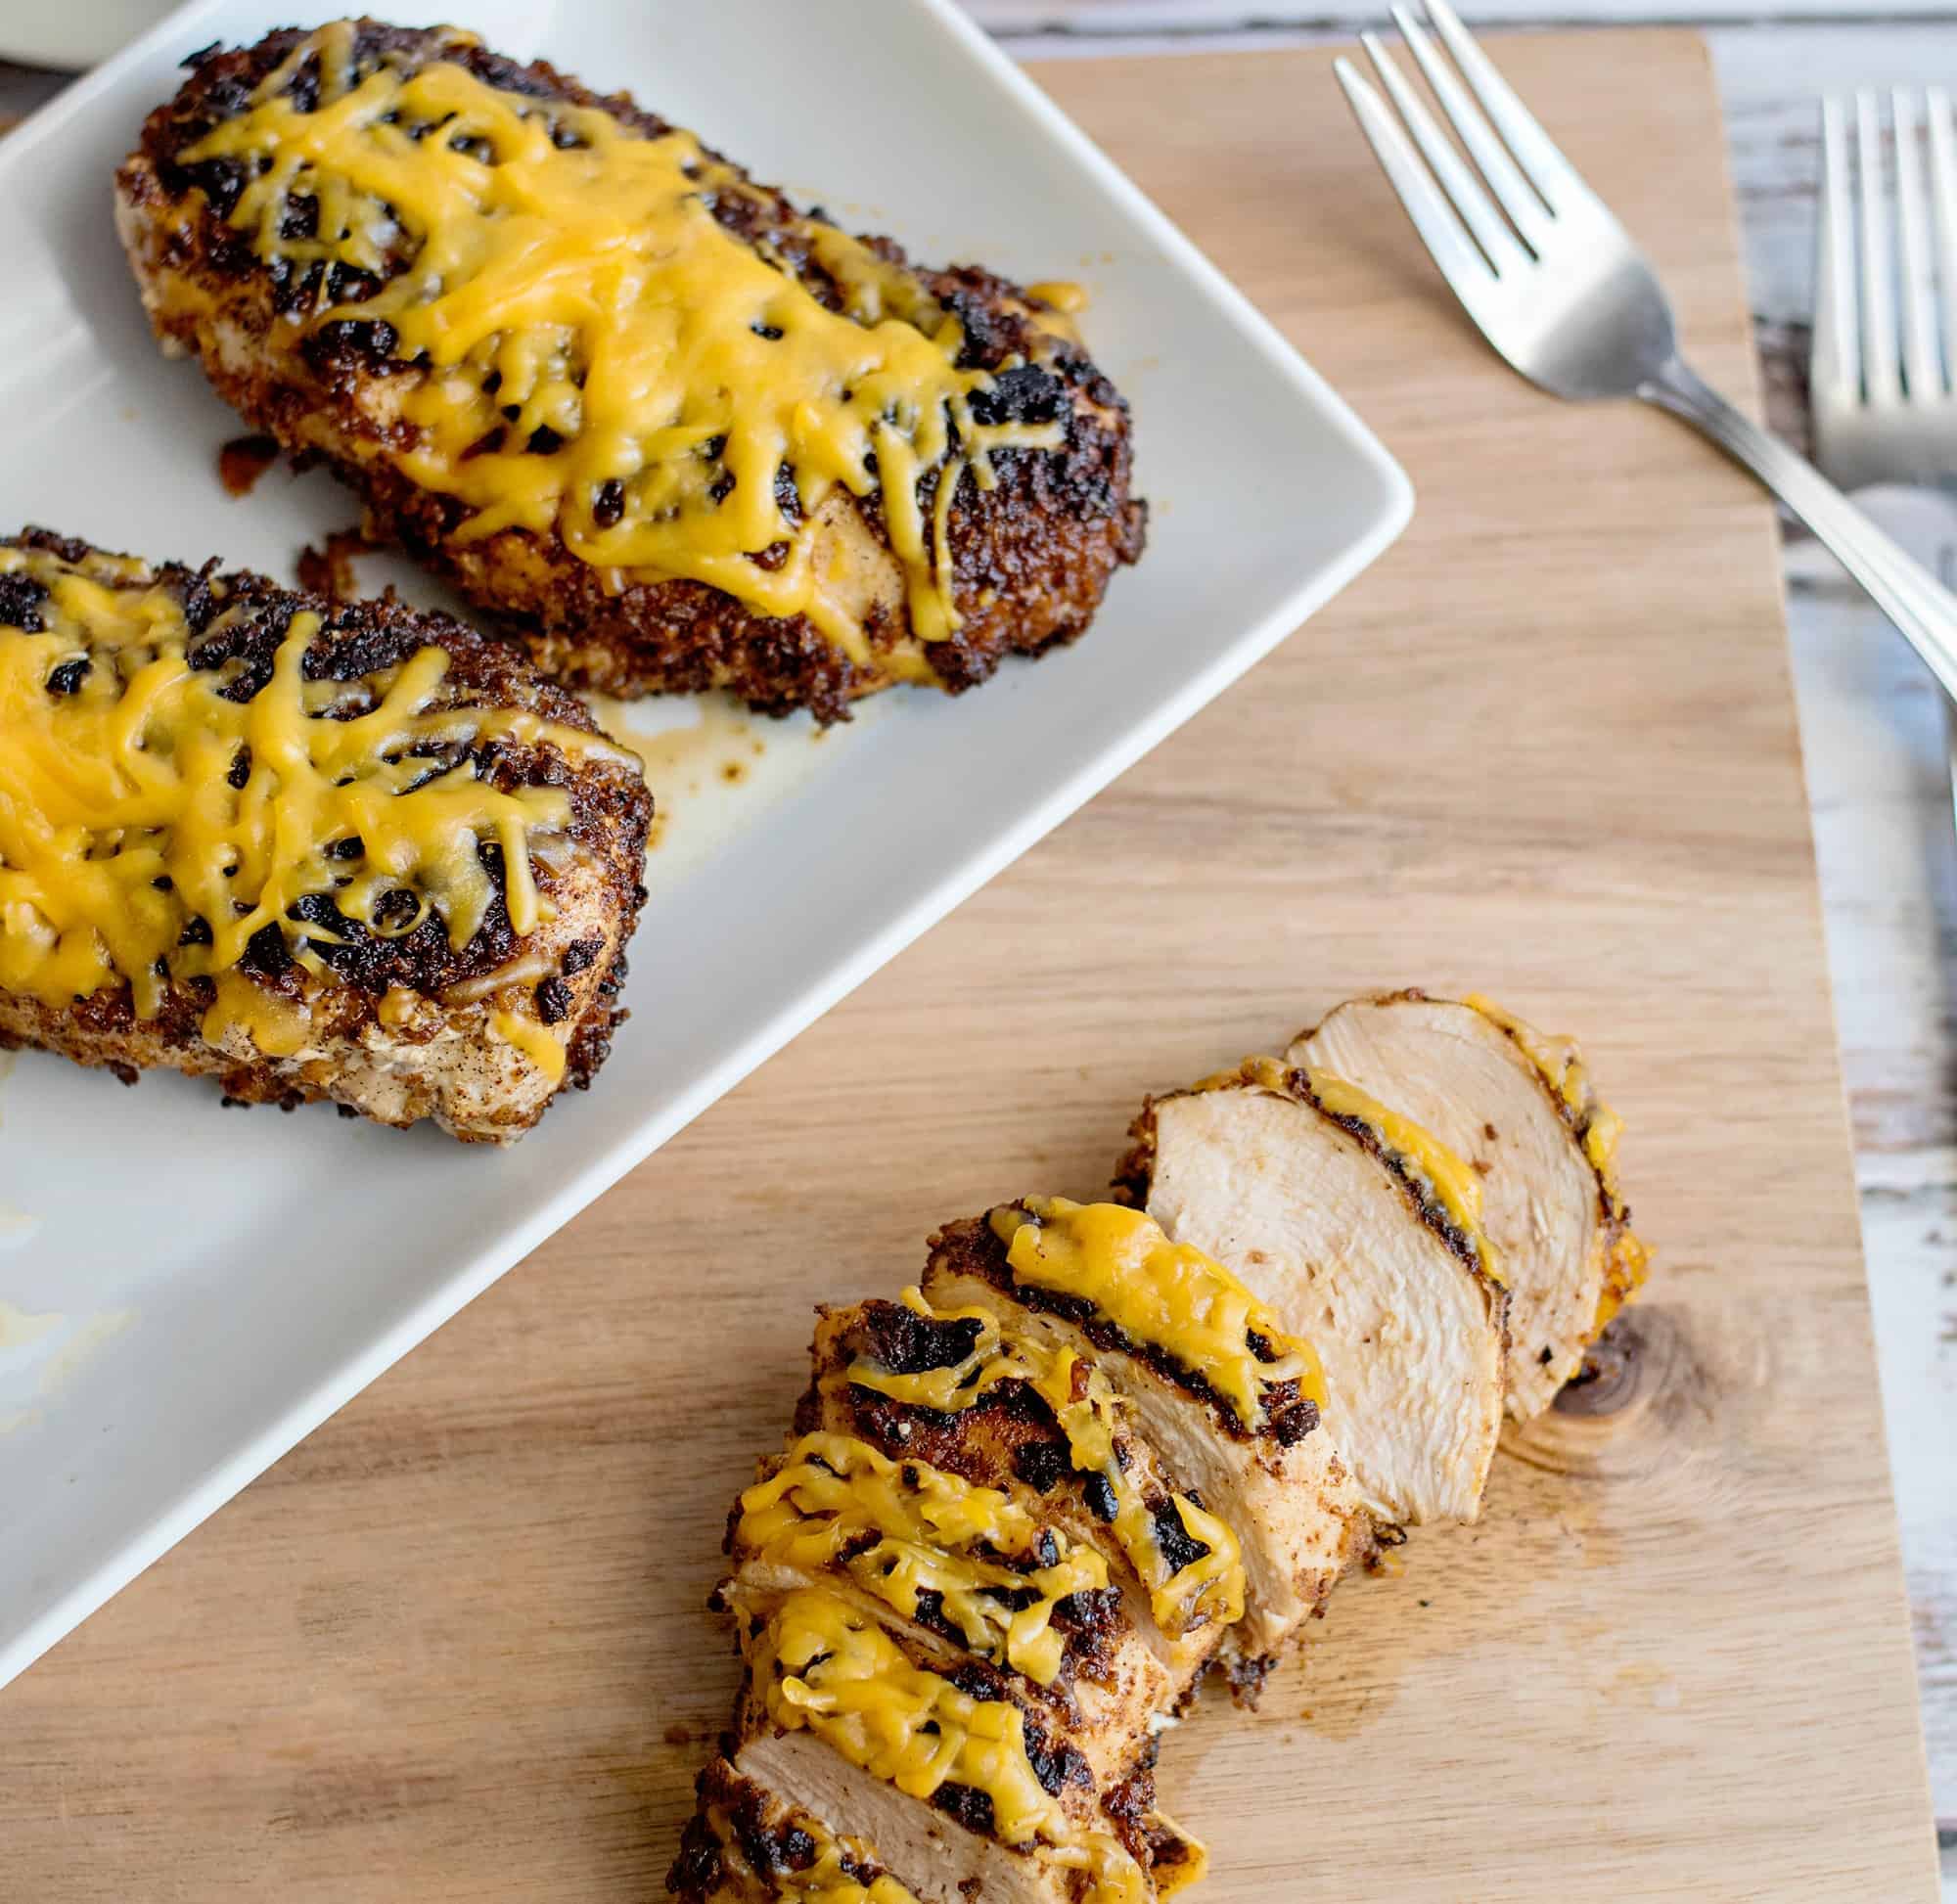 Blackened Chicken Recipe With Cheese Topping